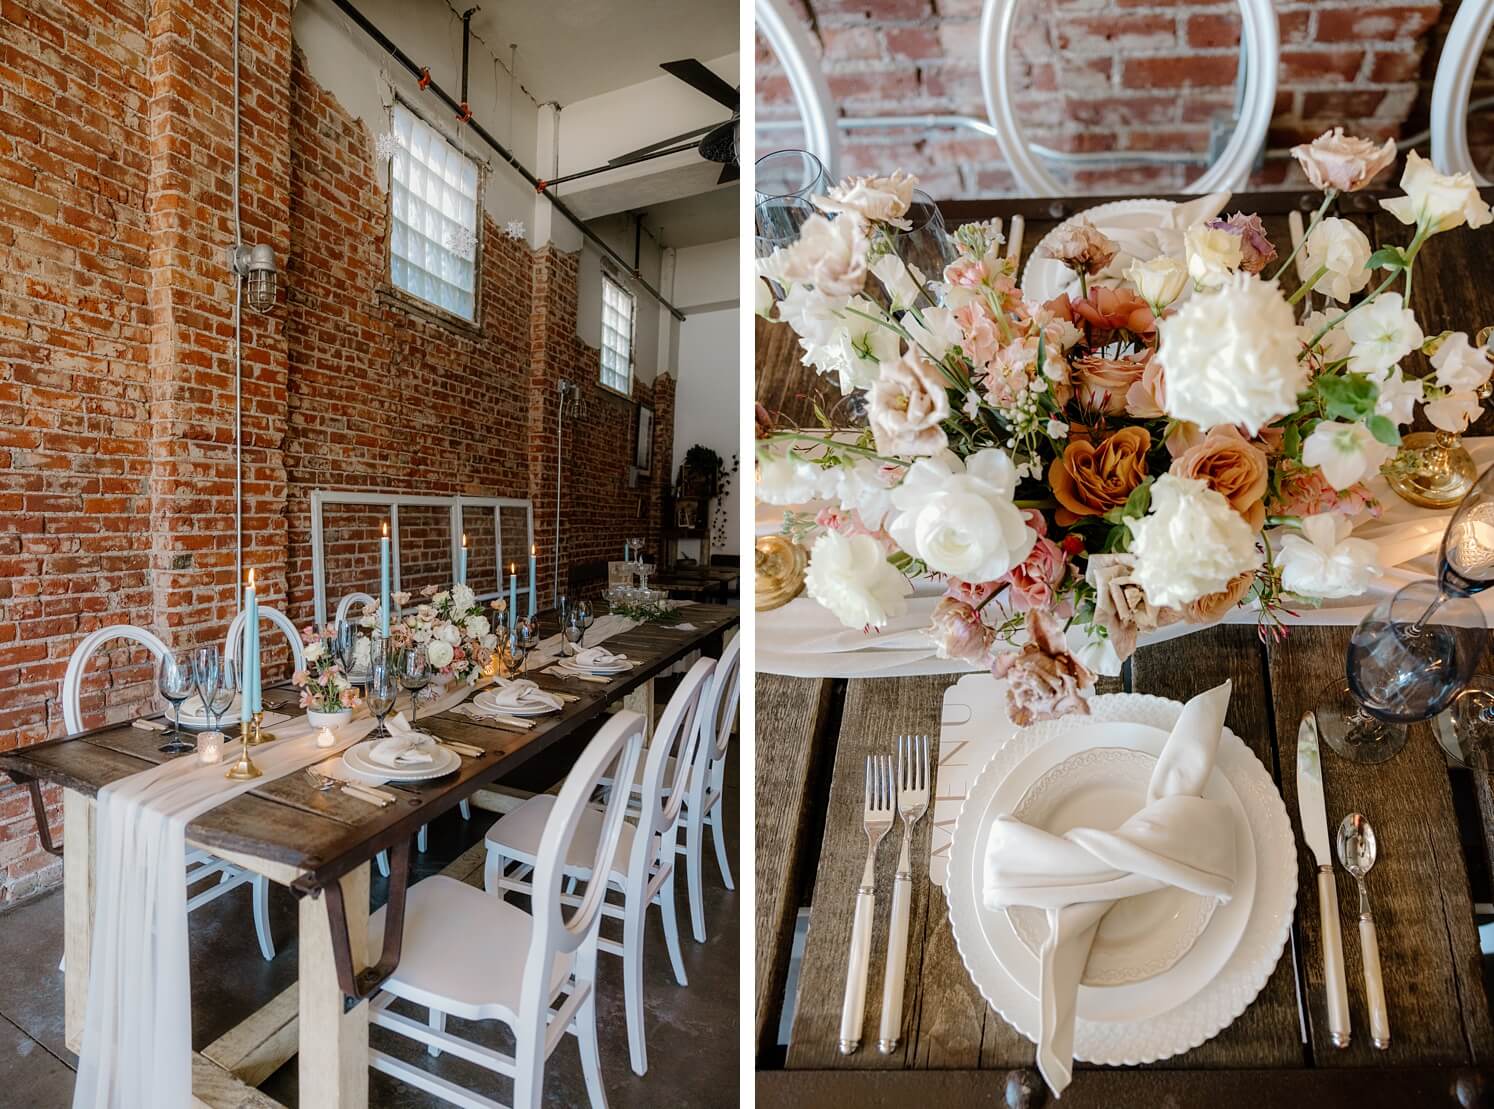 Rustic wooden table with flowers and candles against exposed brick wall at Queensbury Rules Coffee House | flower arrangement in front of white place setting with white menu | McArthur Weddings and Events